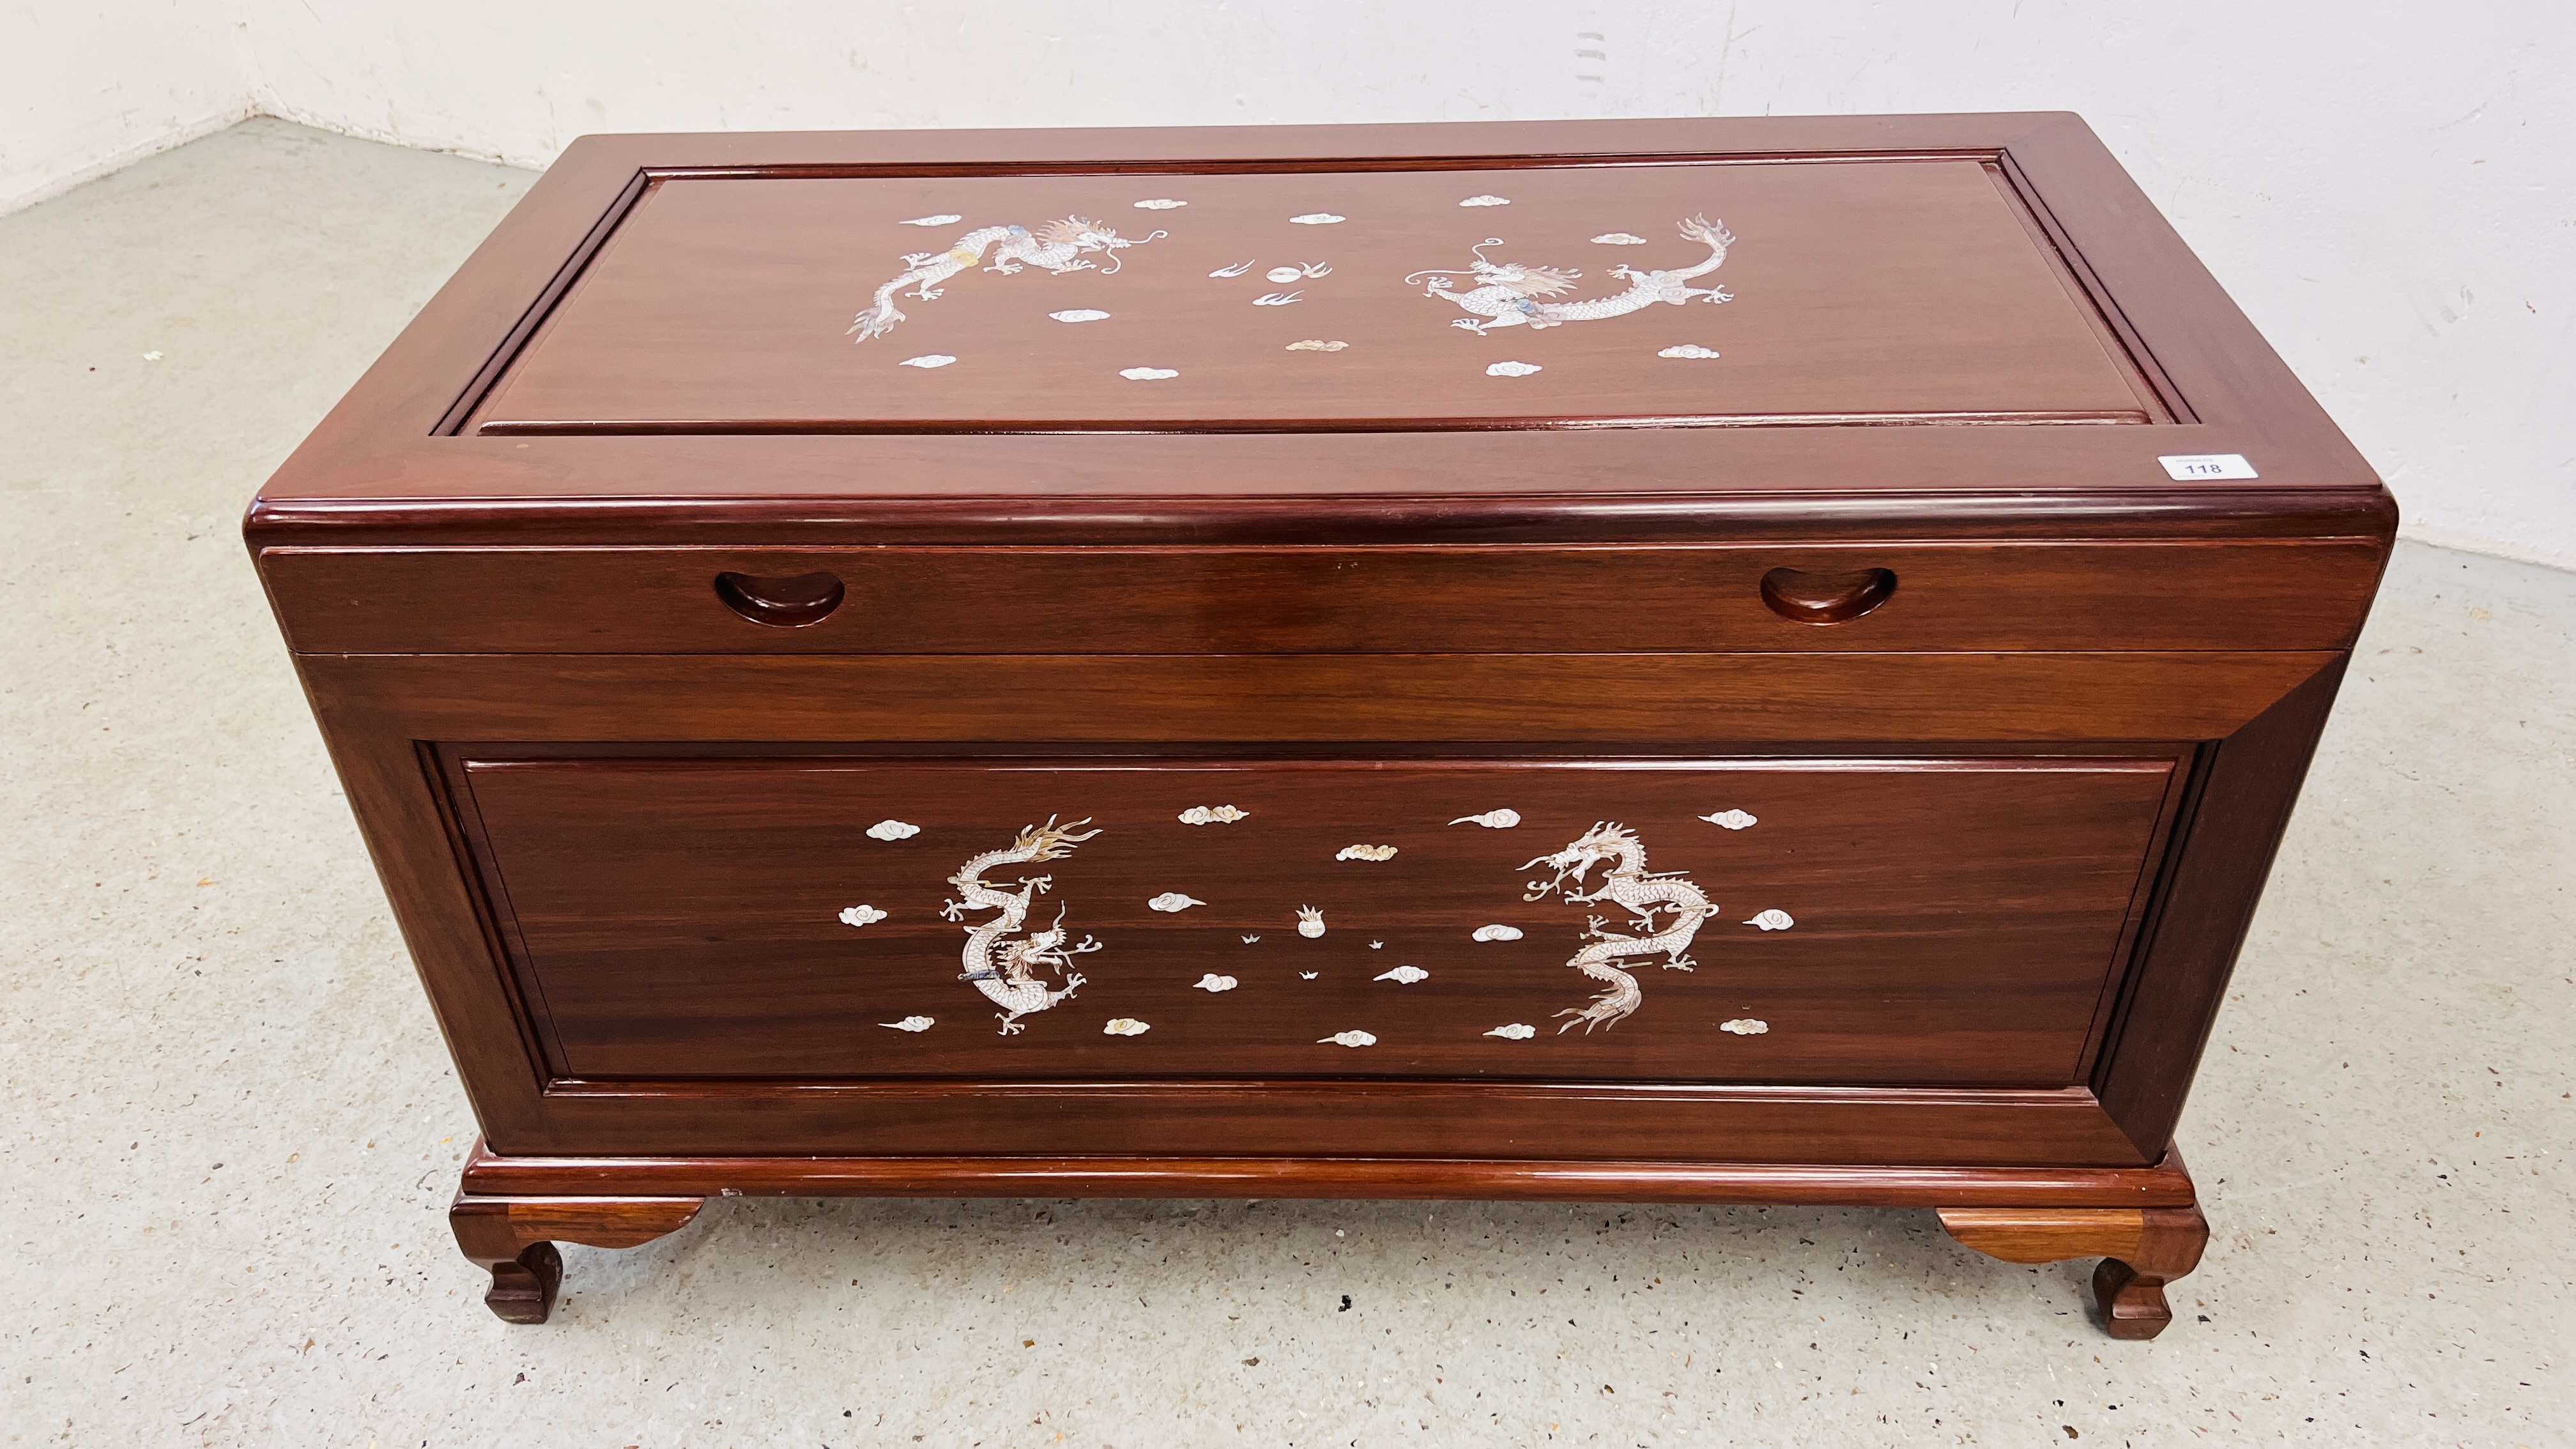 A GOOD QUALITY HARDWOOD ORIENTAL CHEST WITH MOTHER OF PEARL DRAGON INLAY.